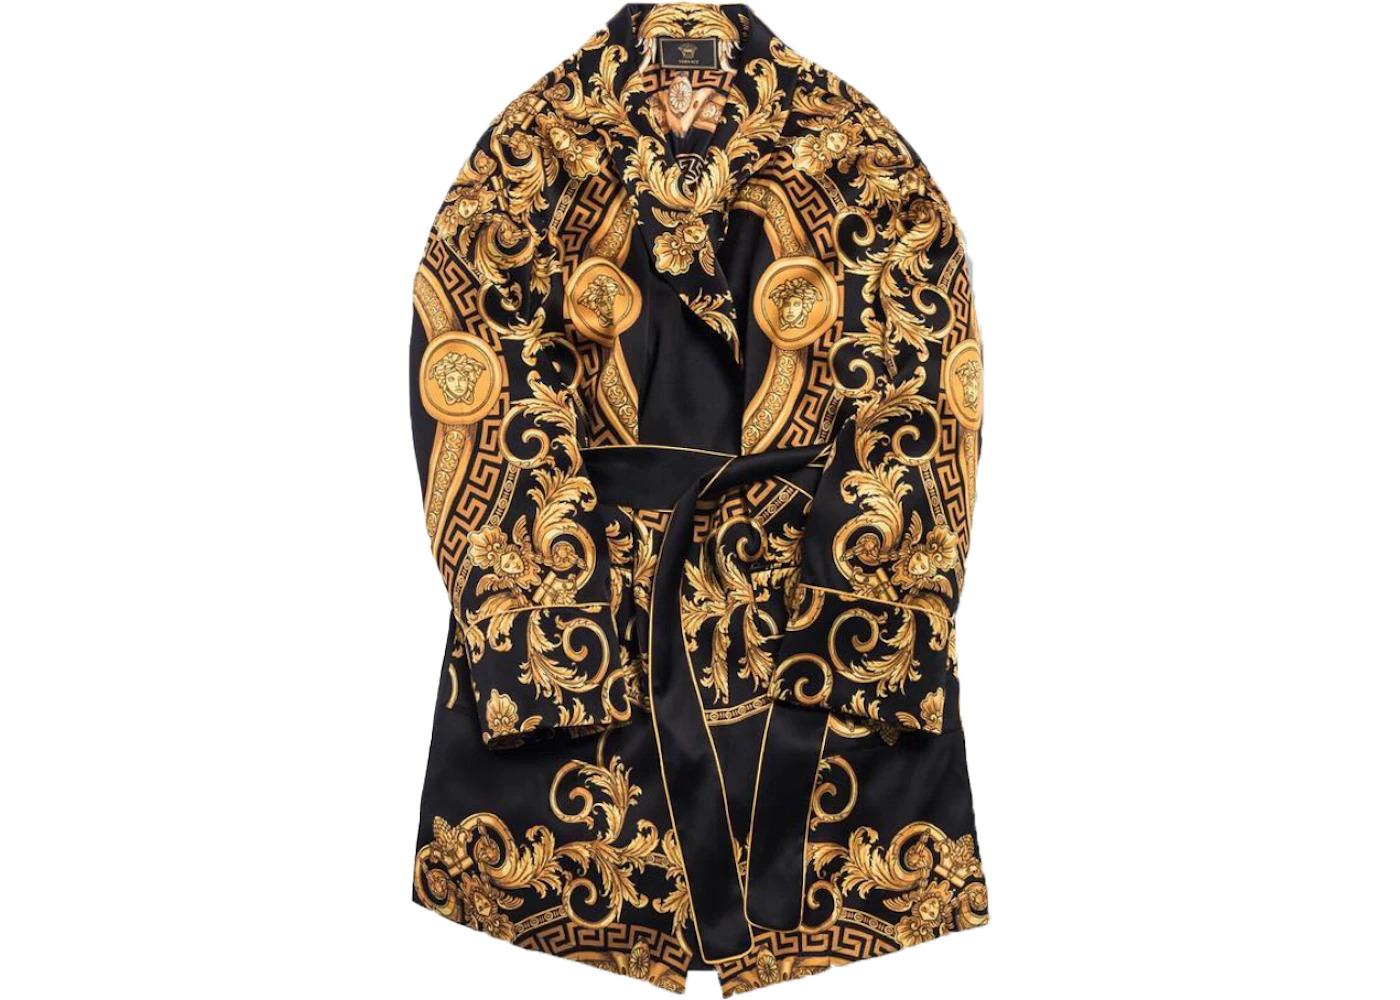 How Much Is Versace Robe